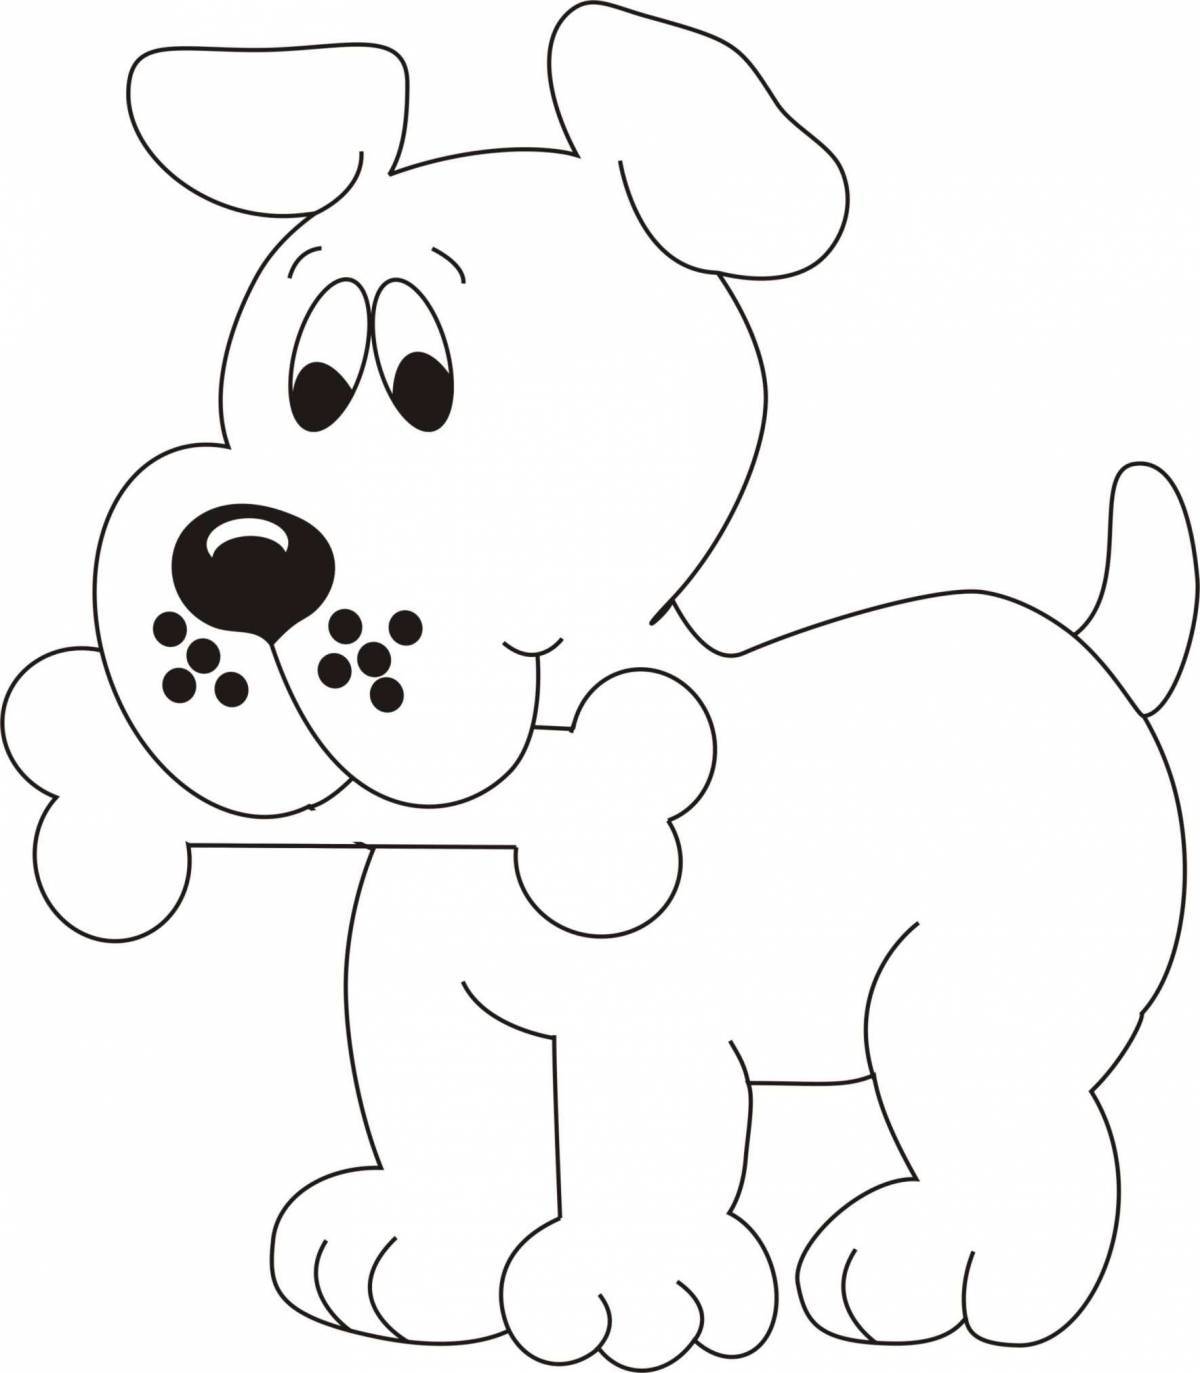 Sweet doggy coloring page for juniors